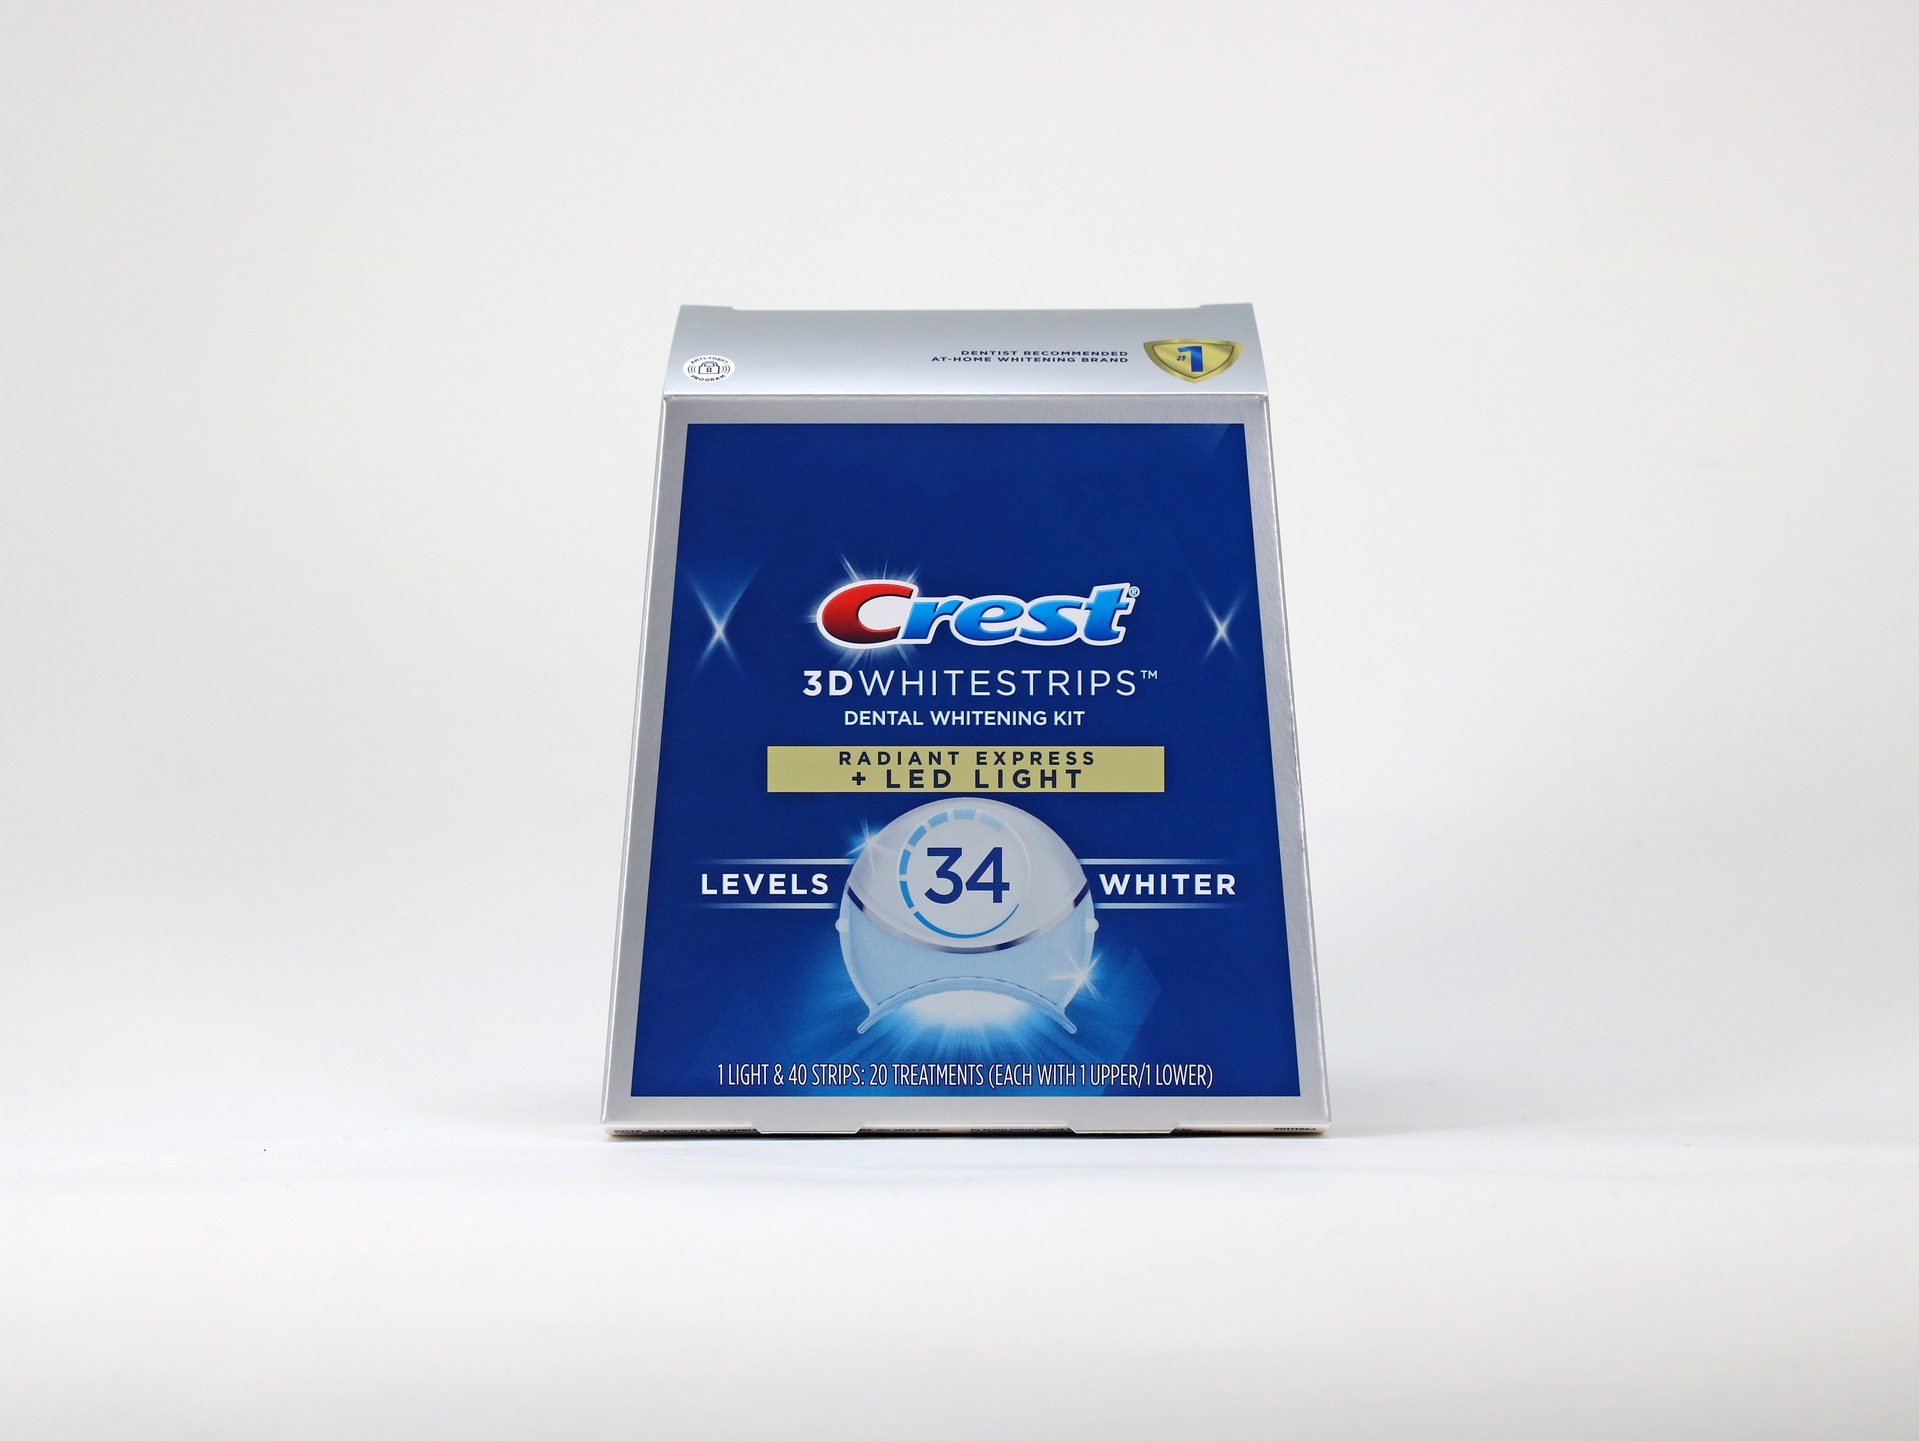 Crest 3D Whitestrips Radiant Express folding cartons feature soft touch coating, cold foiling, and embossing